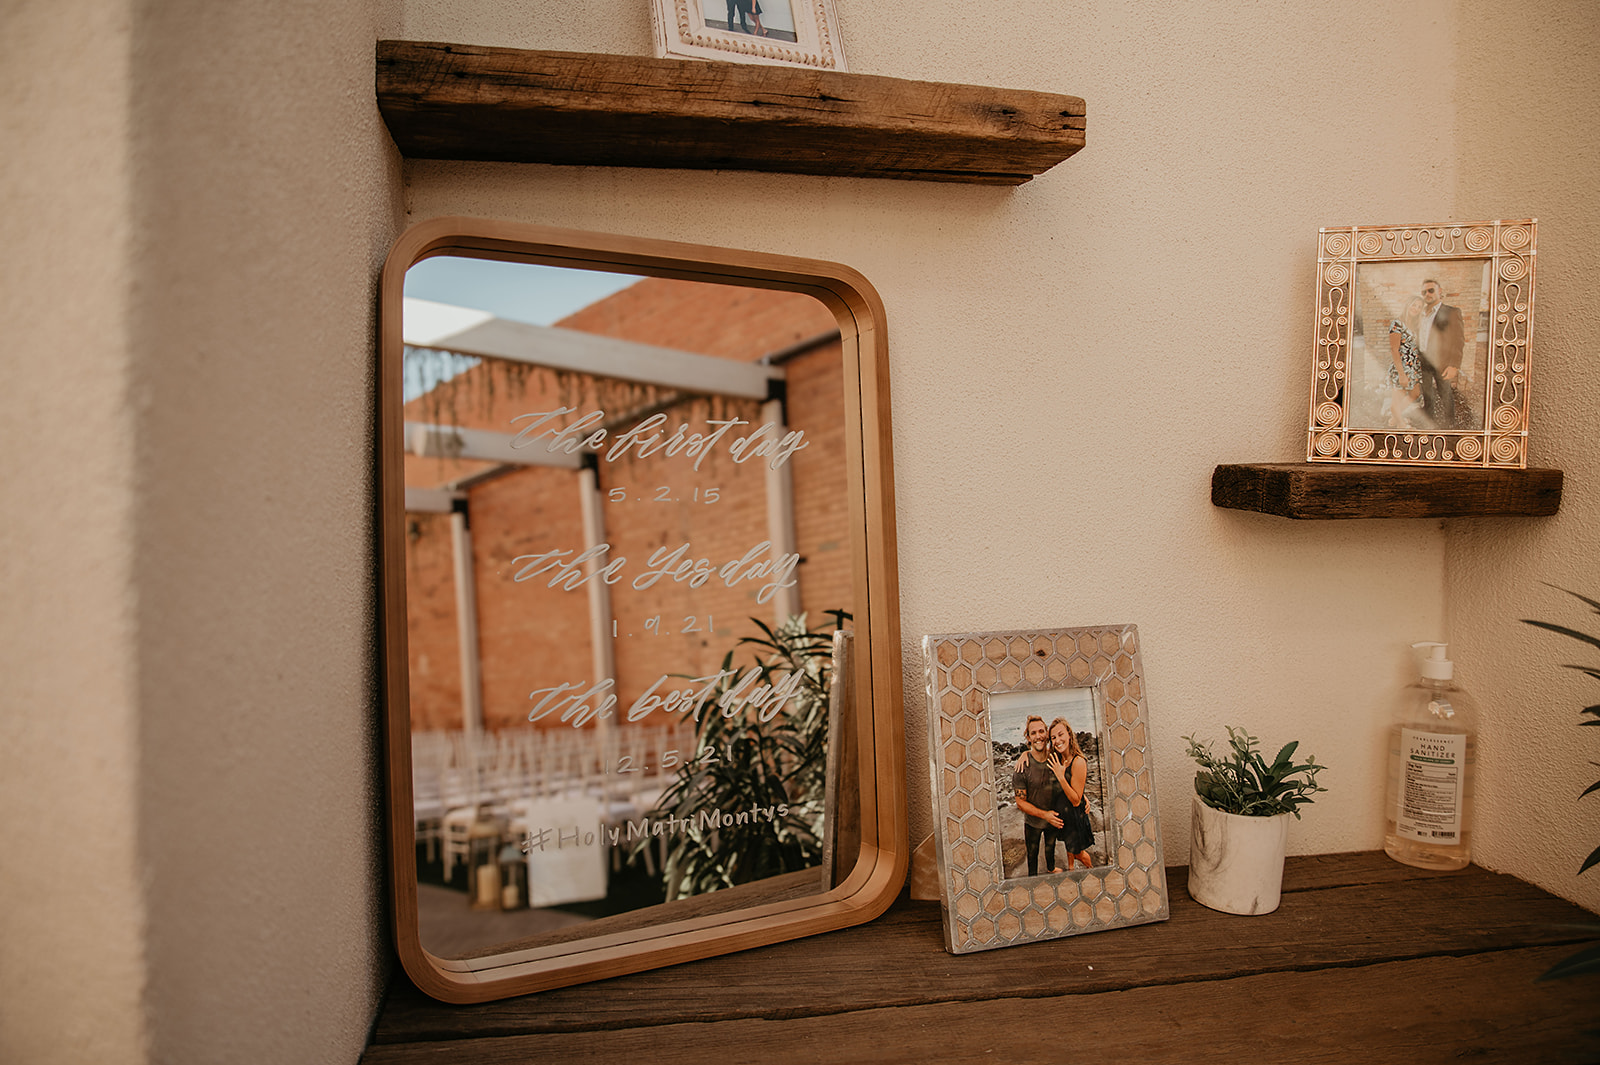 Warm, Fun Boho Wedding with a Fun Afterparty | Southwest Wed